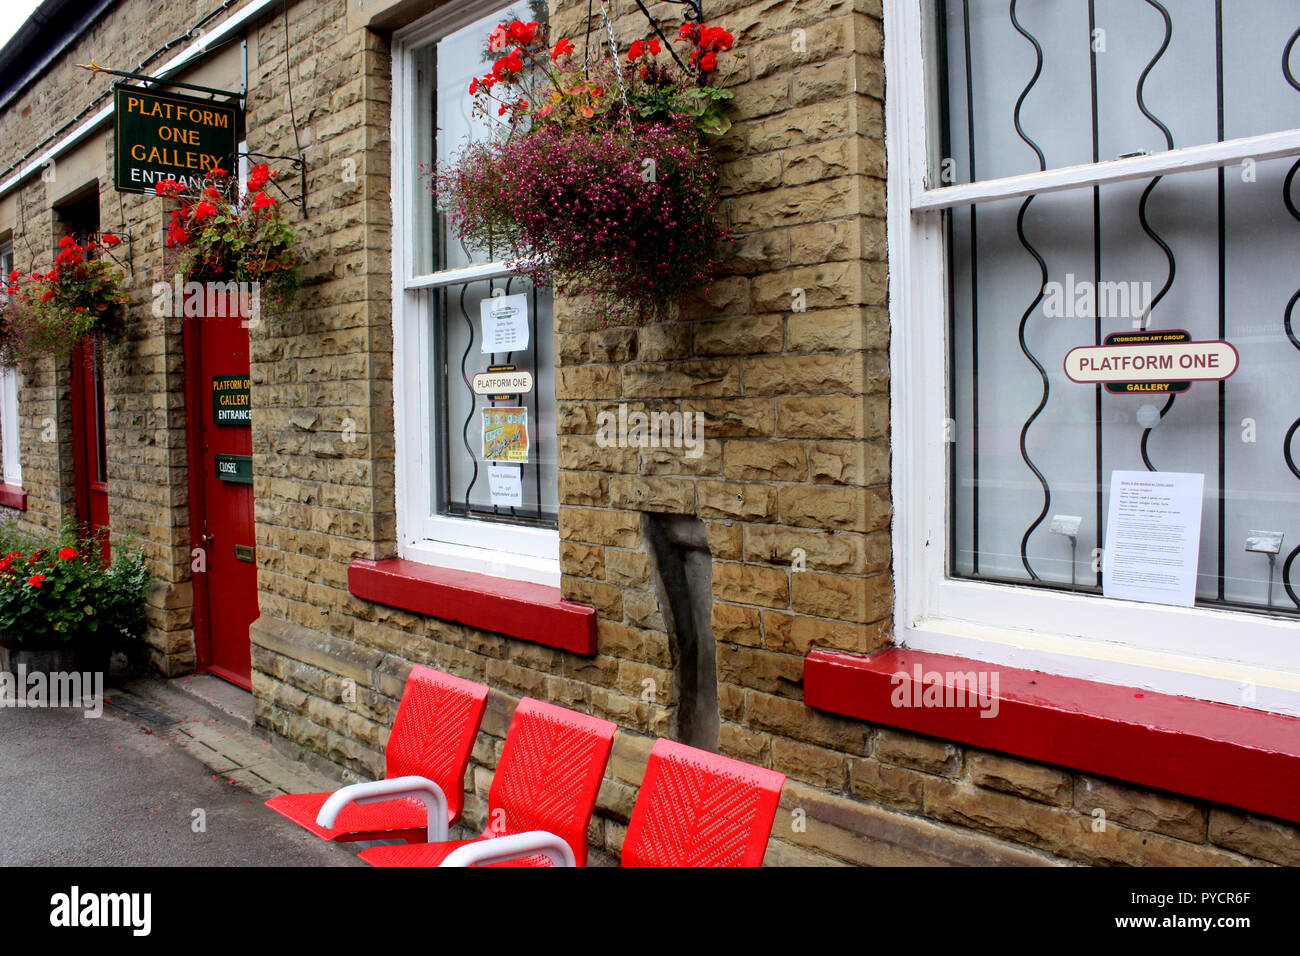 One of the artist's studios at the train station in Todmorden, West Yorkshire Stock Photo